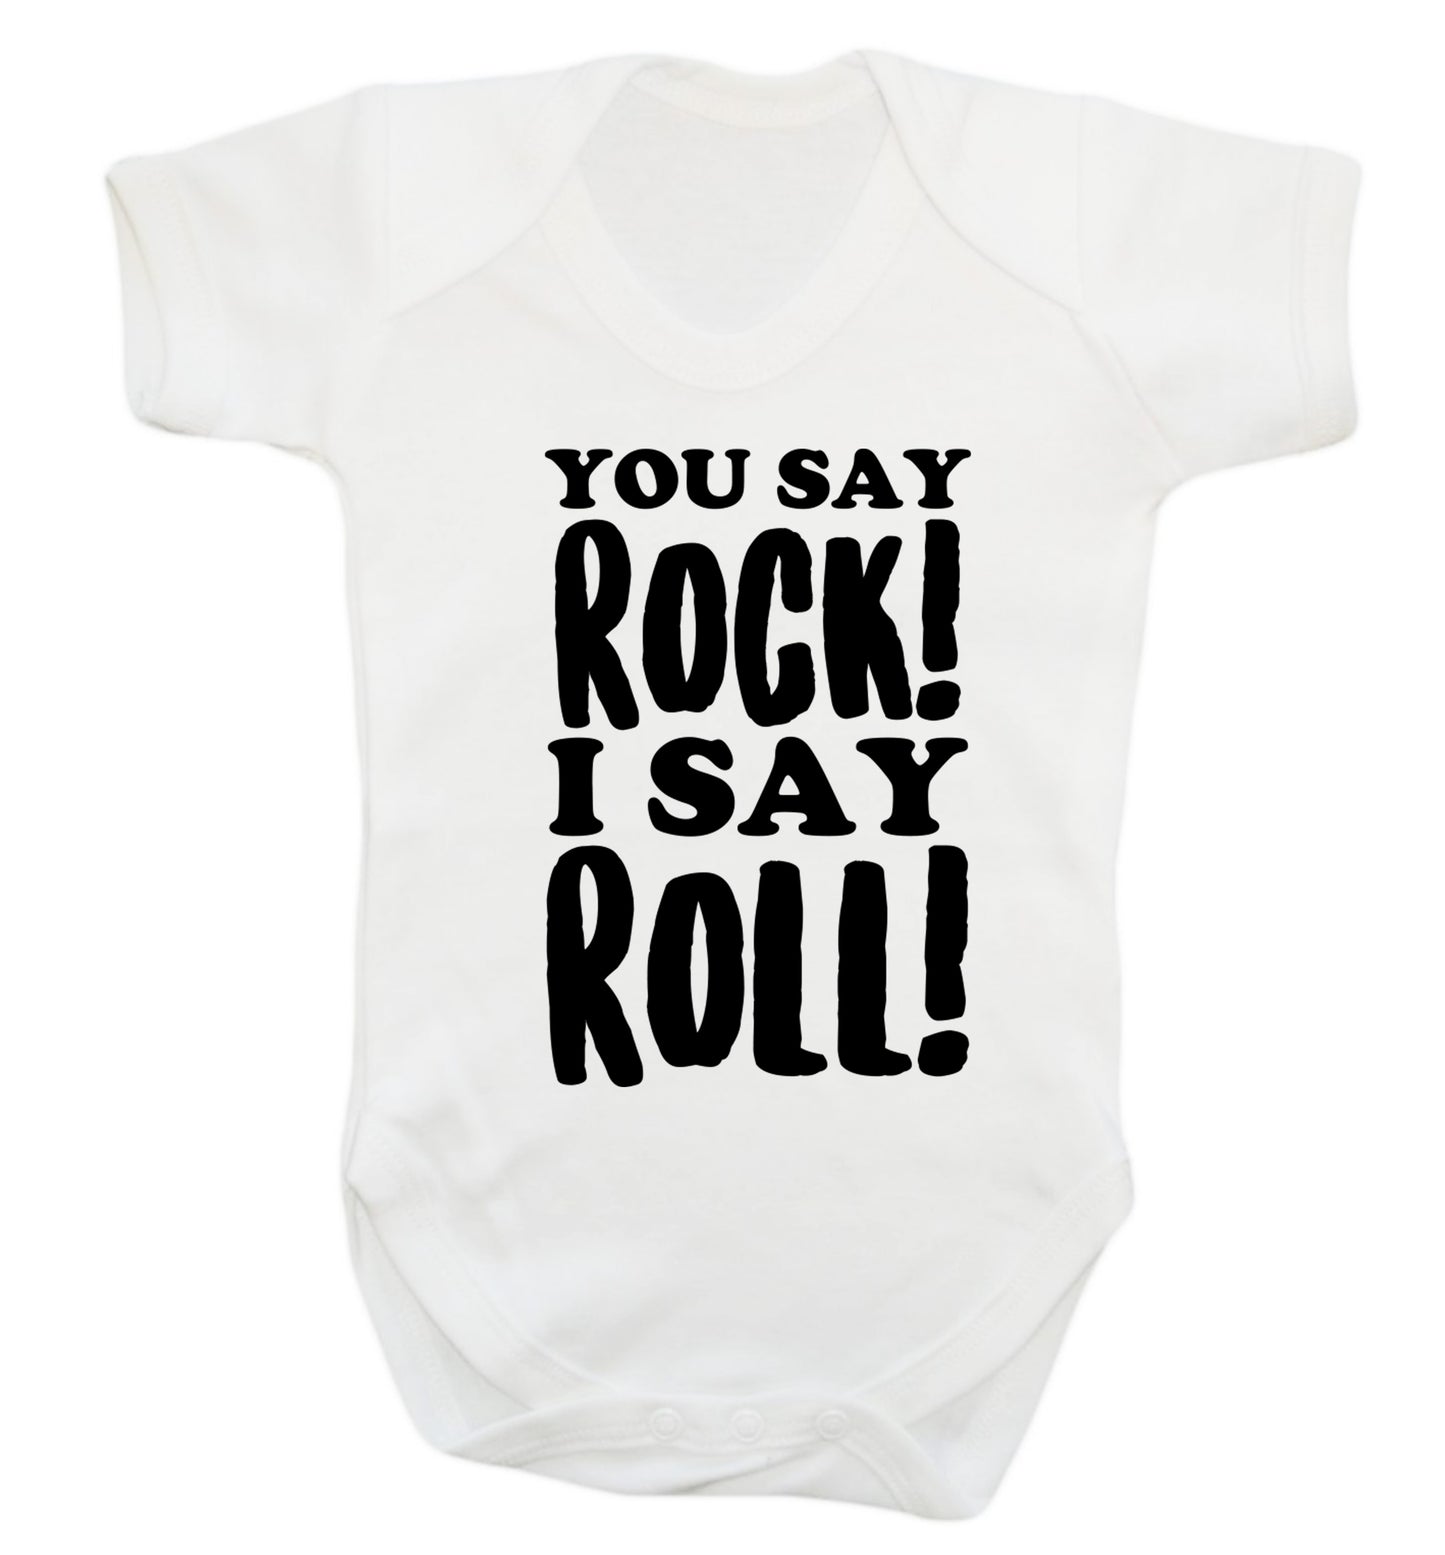 You say rock I say roll! Baby Vest white 18-24 months